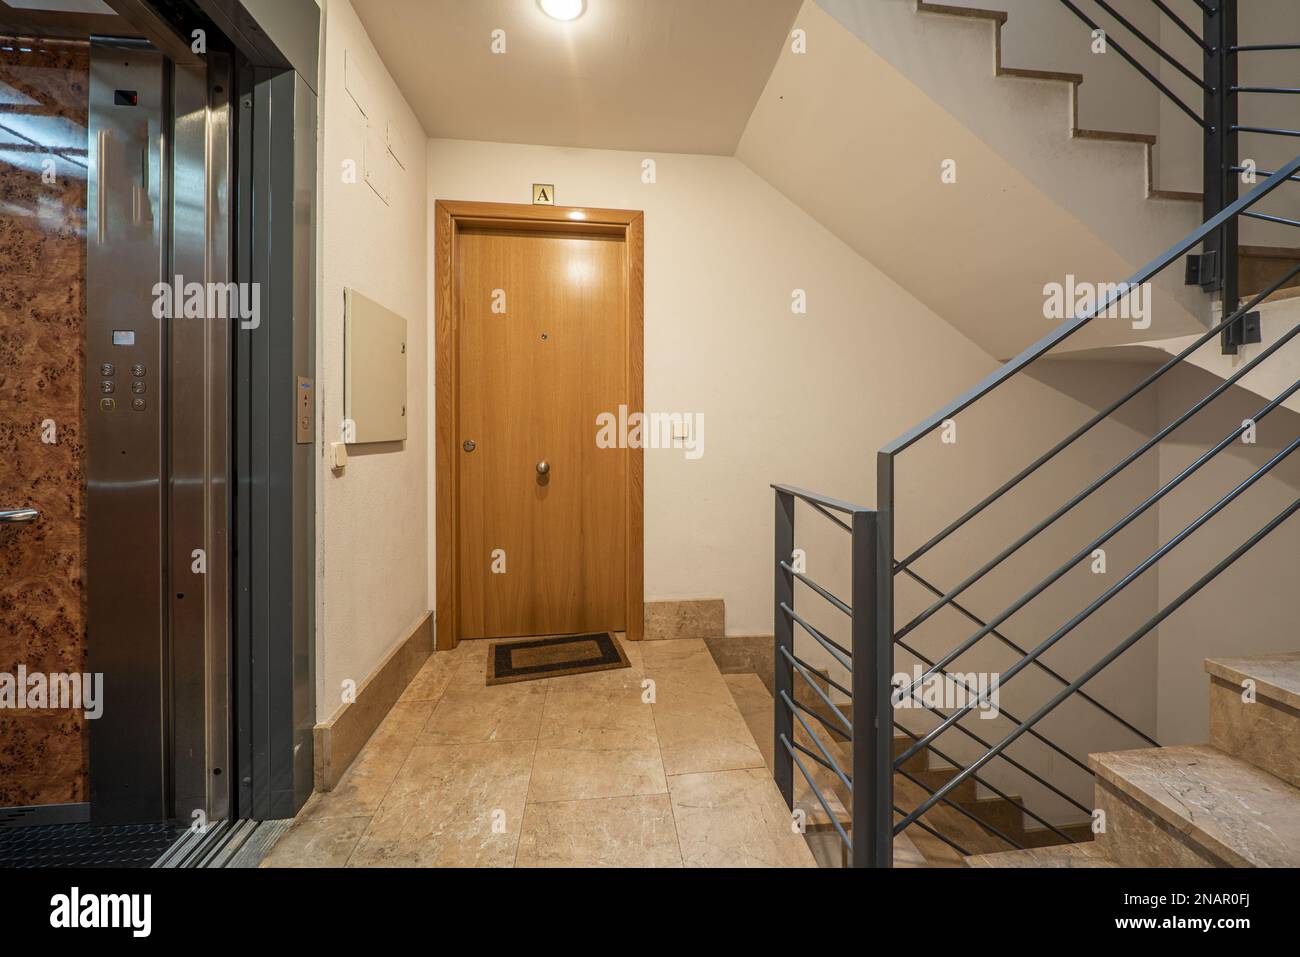 Interior of a residential apartment portal with an elevator with gray metal doors and polished cream marble floors, gray metal railings and marble sta Stock Photo